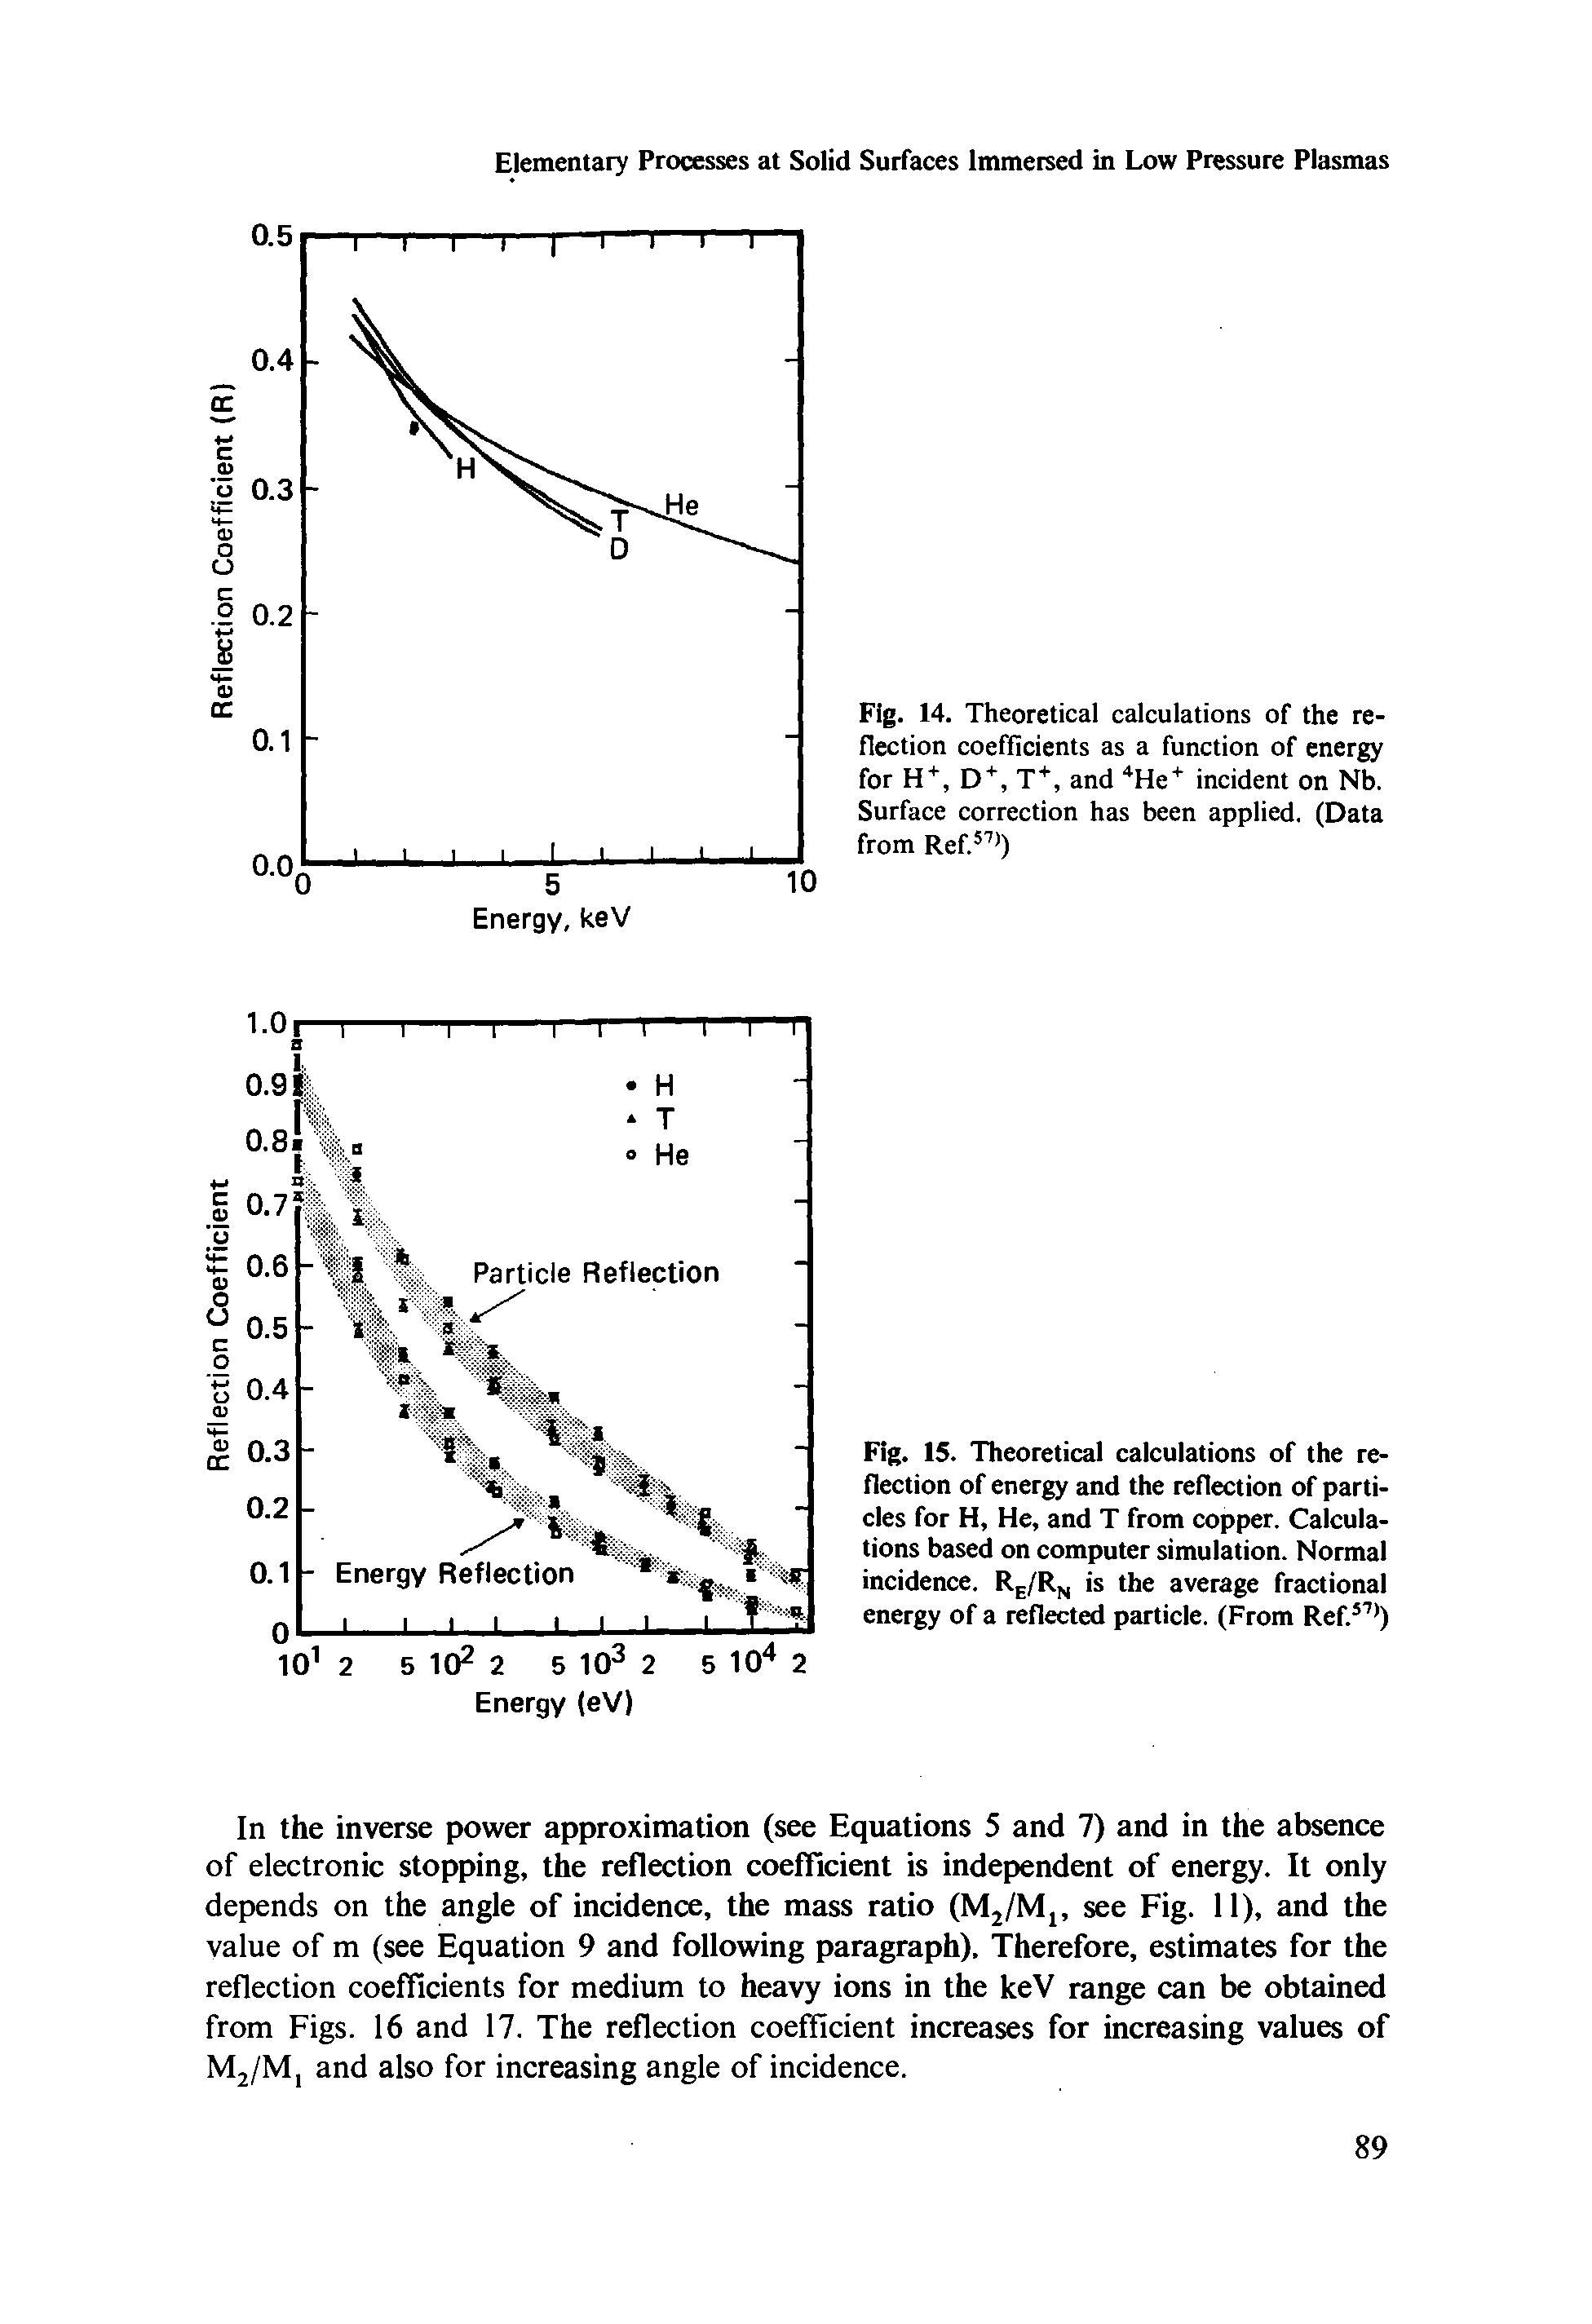 Fig. 15. Theoretical calculations of the reflection of energy and the reflection of particles for H, He, and T from copper. Calculations based on computer simulation. Normal incidence. R /Rn is the average fractional energy of a reflected particle. (From Ref. )...